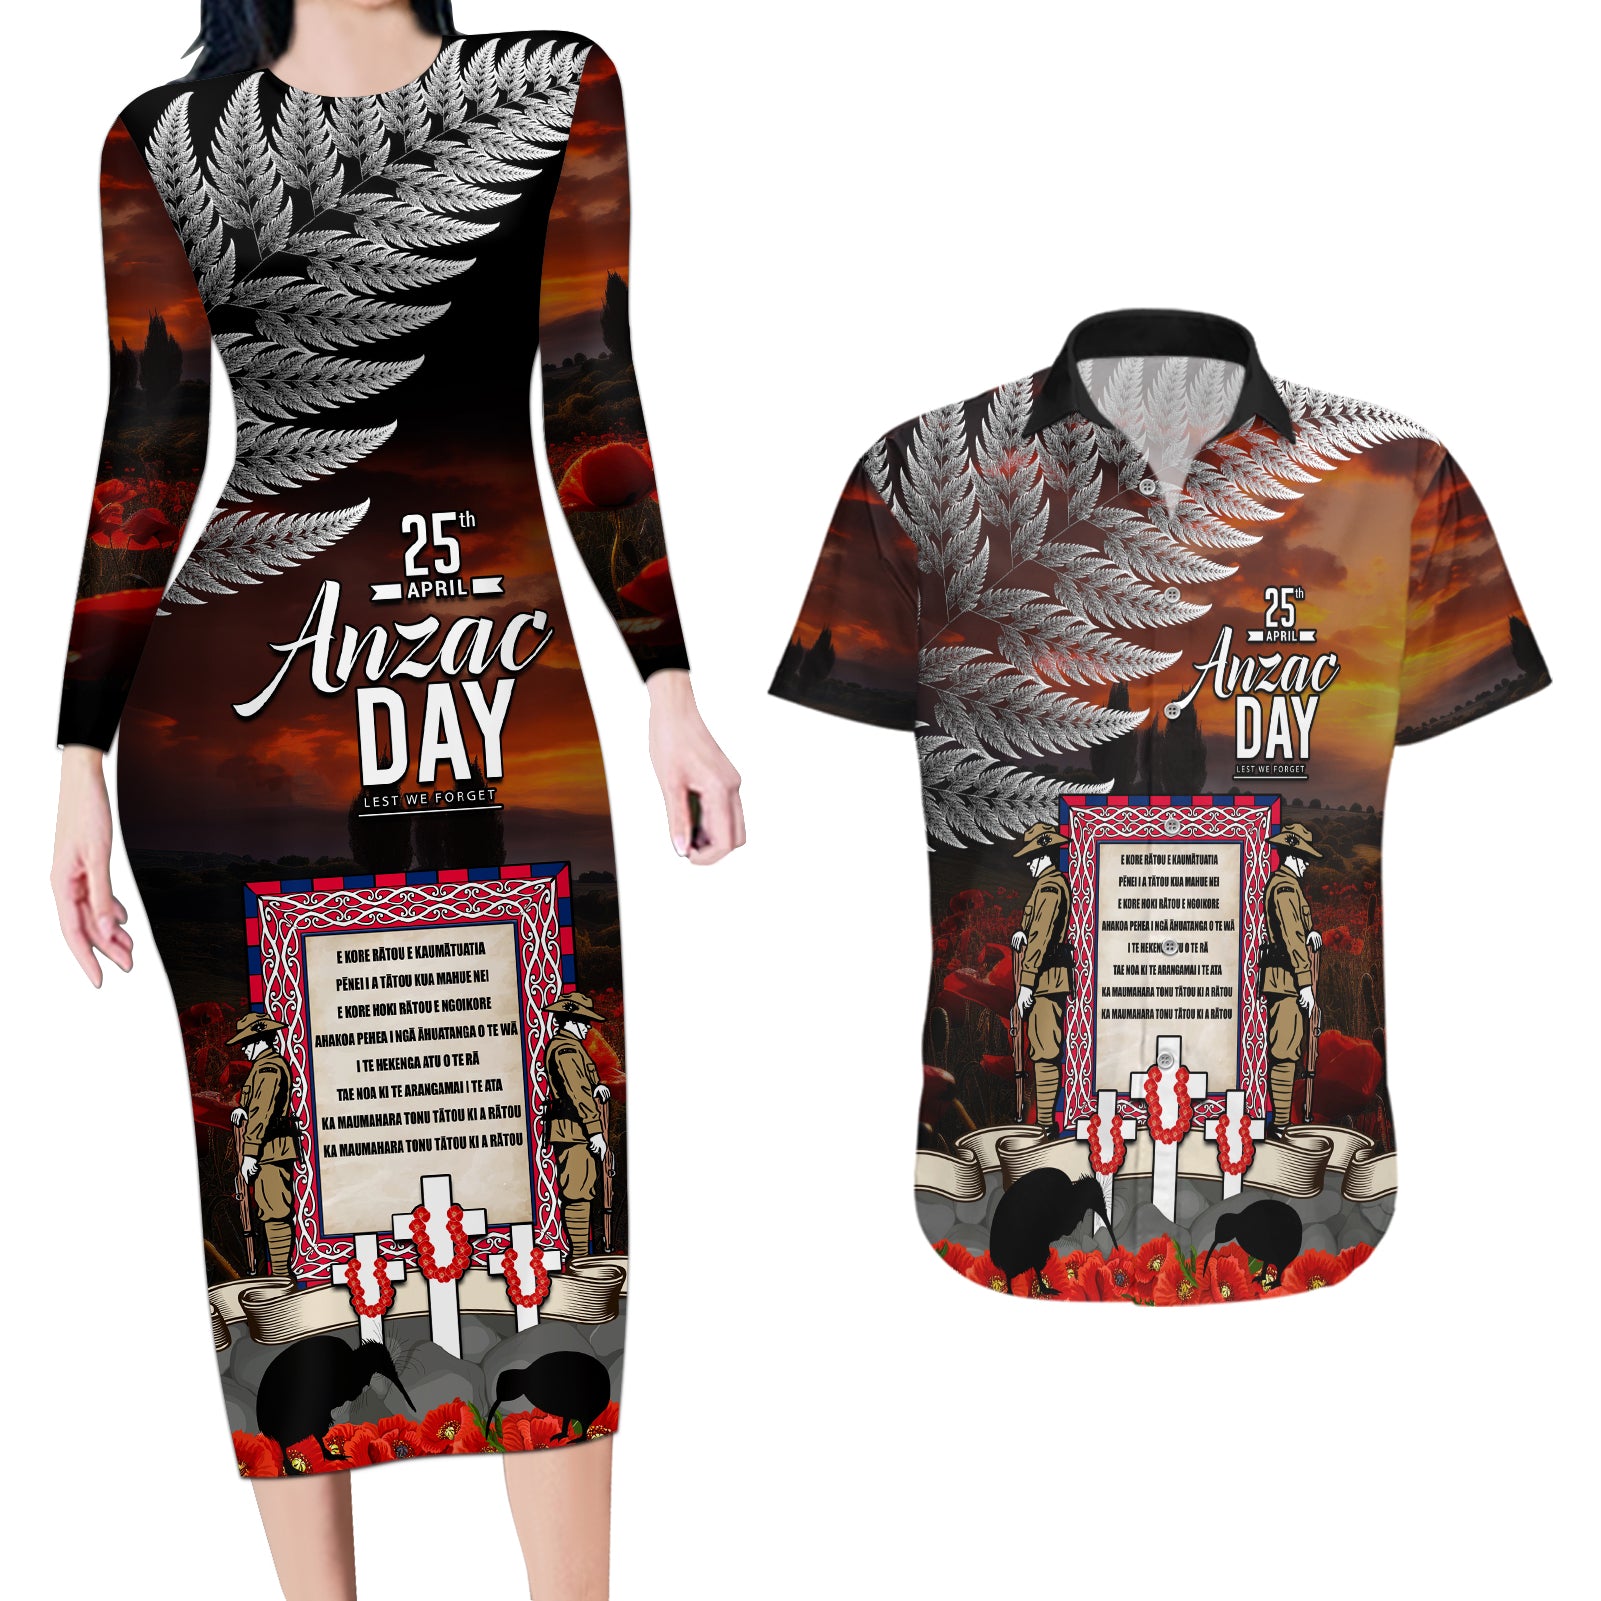 New Zealand ANZAC Day Couples Matching Long Sleeve Bodycon Dress and Hawaiian Shirt The Ode of Remembrance and Silver Fern